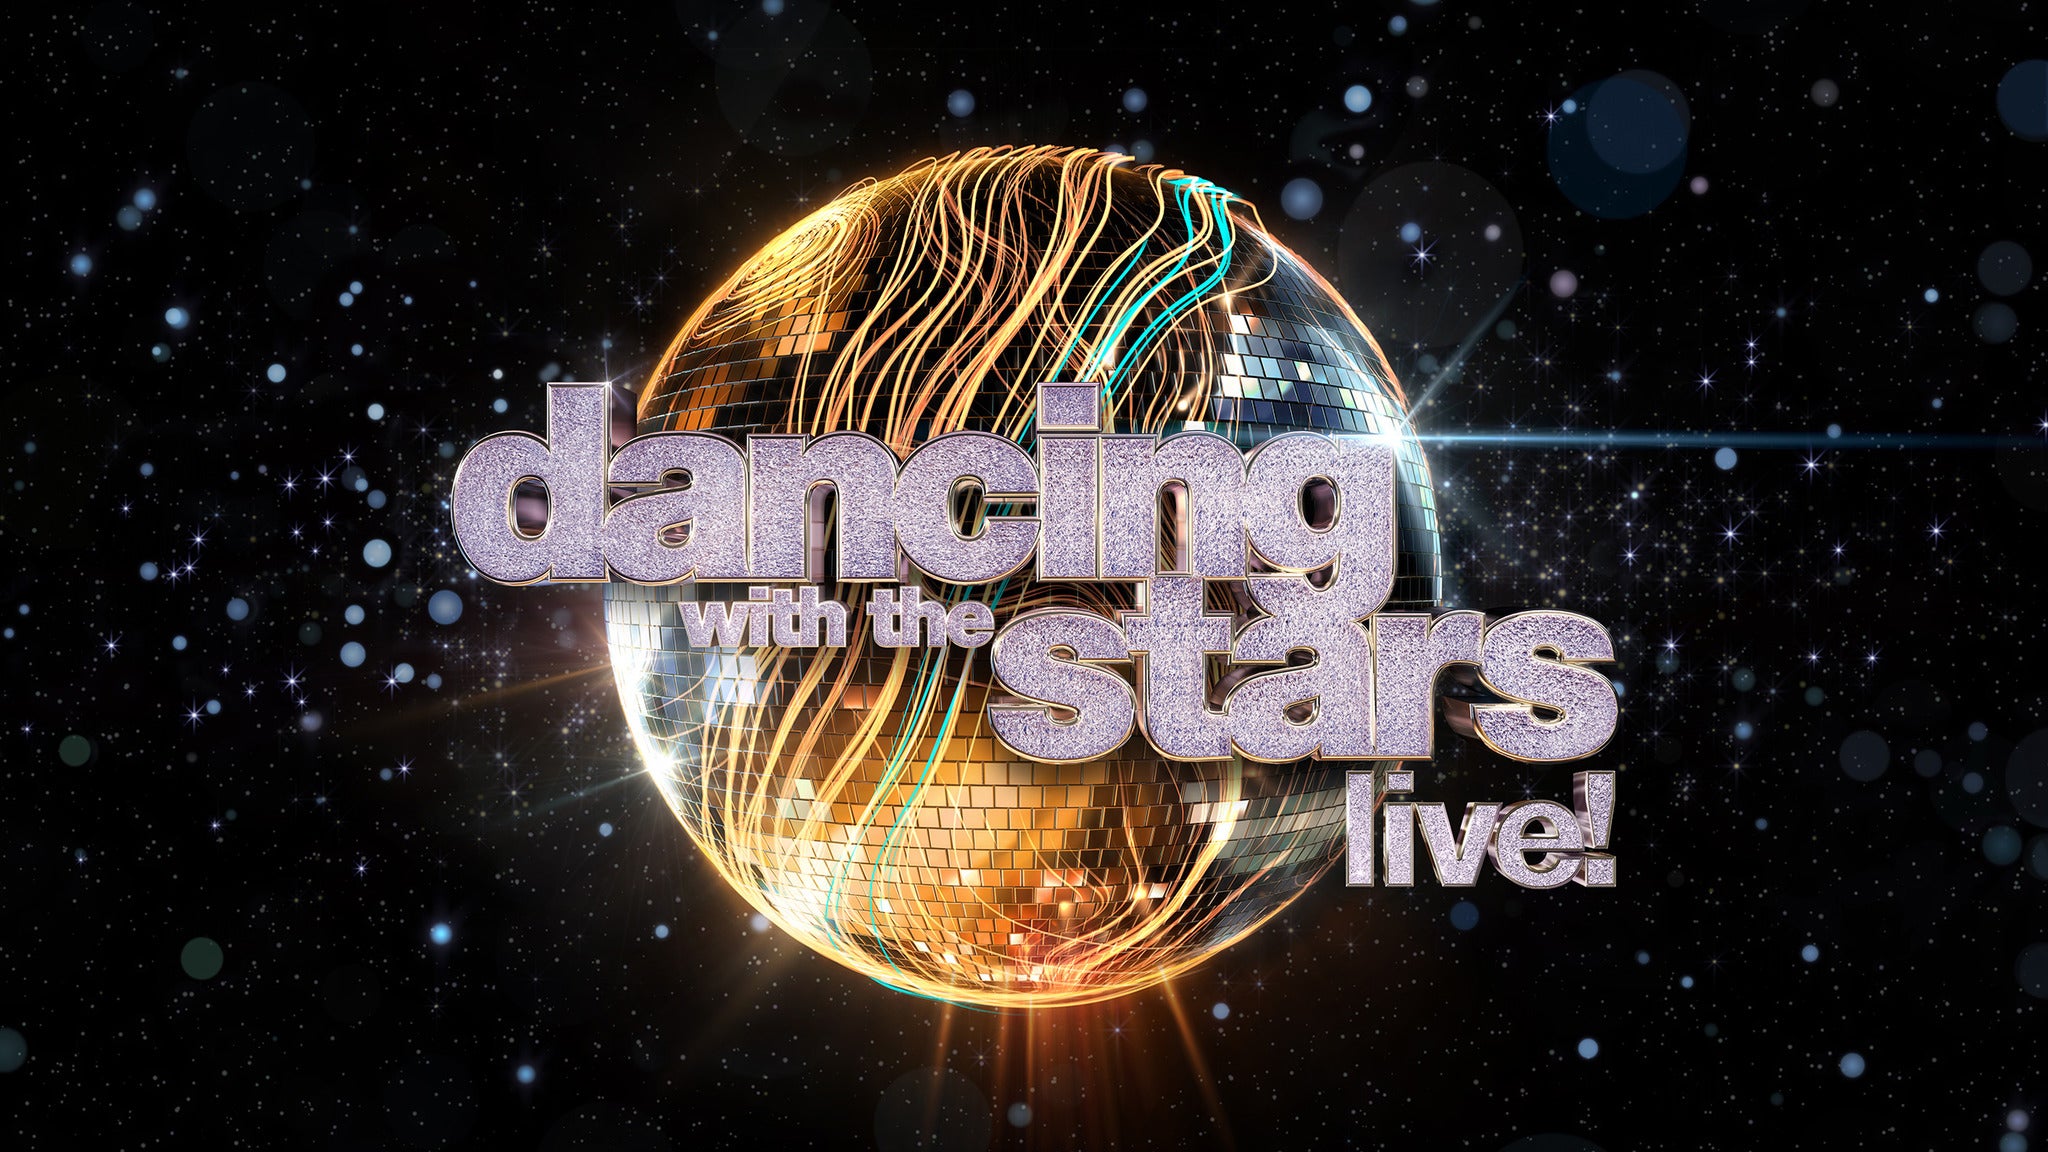 Dancing With The Stars: Live! - Hot Summer Nights in Durham event information